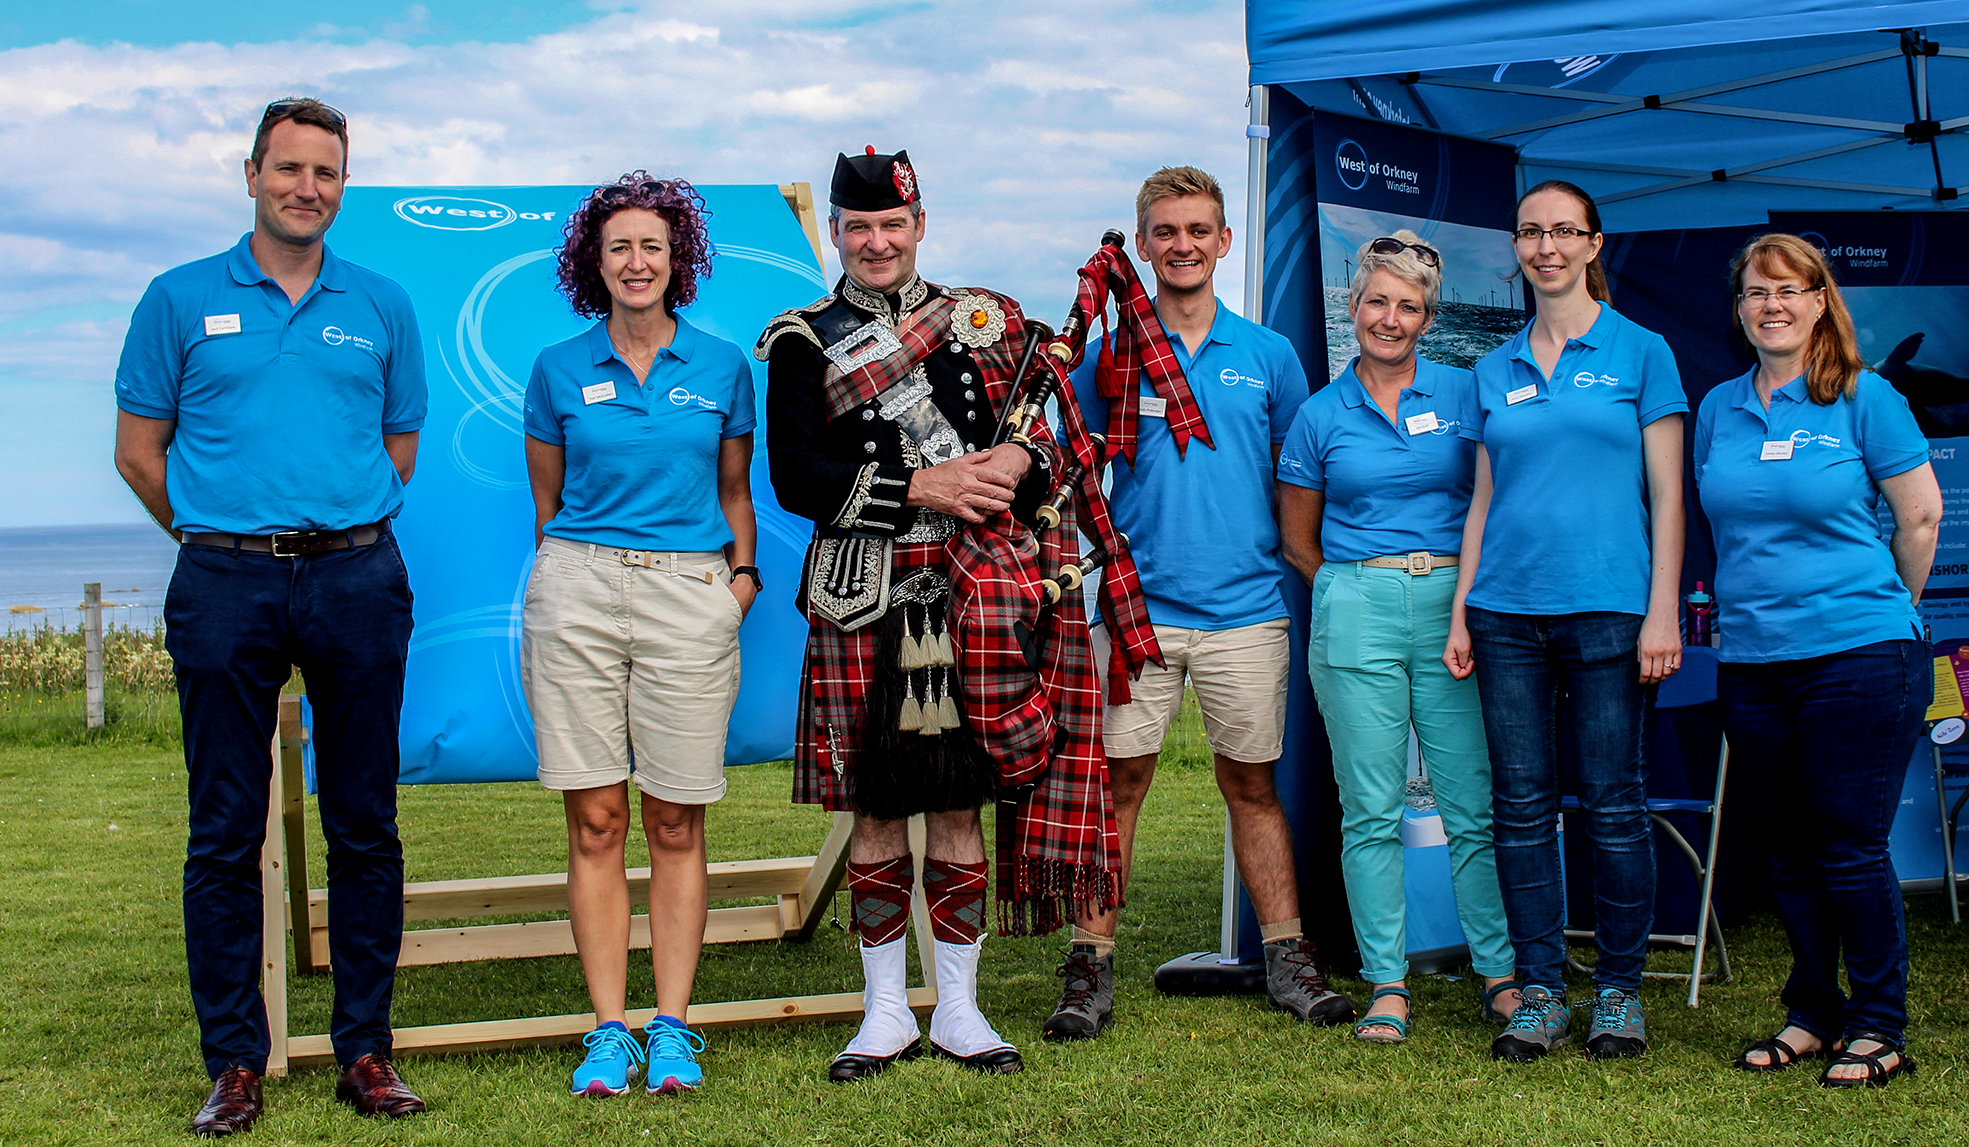 West of Orkney team at the Durness Highland Show, July 2022